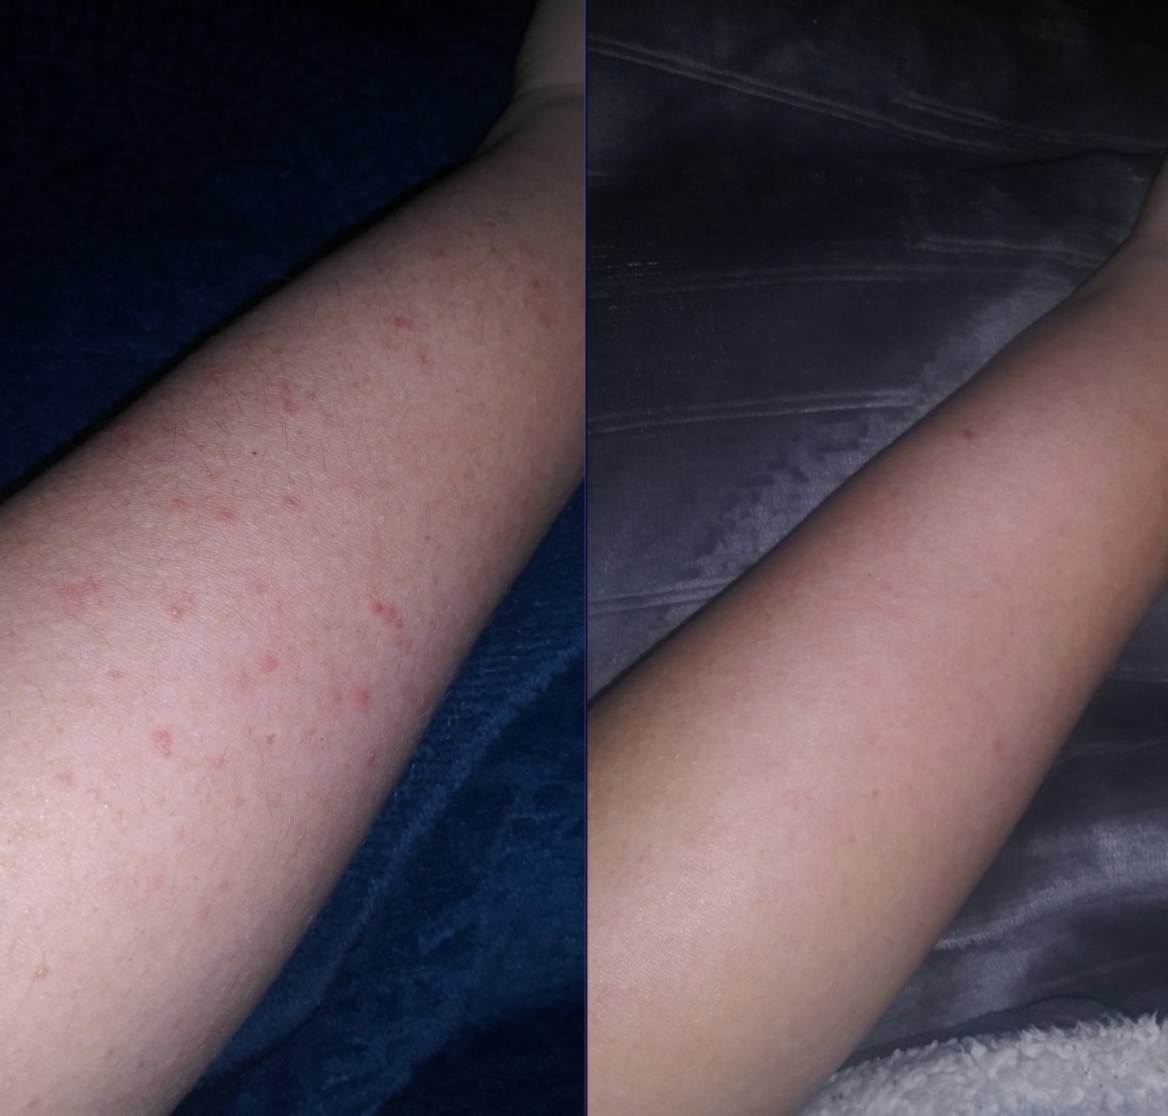 reviewer showing their arm before and after using the KP lotion, showing their bumps significantly reduced after consistent use